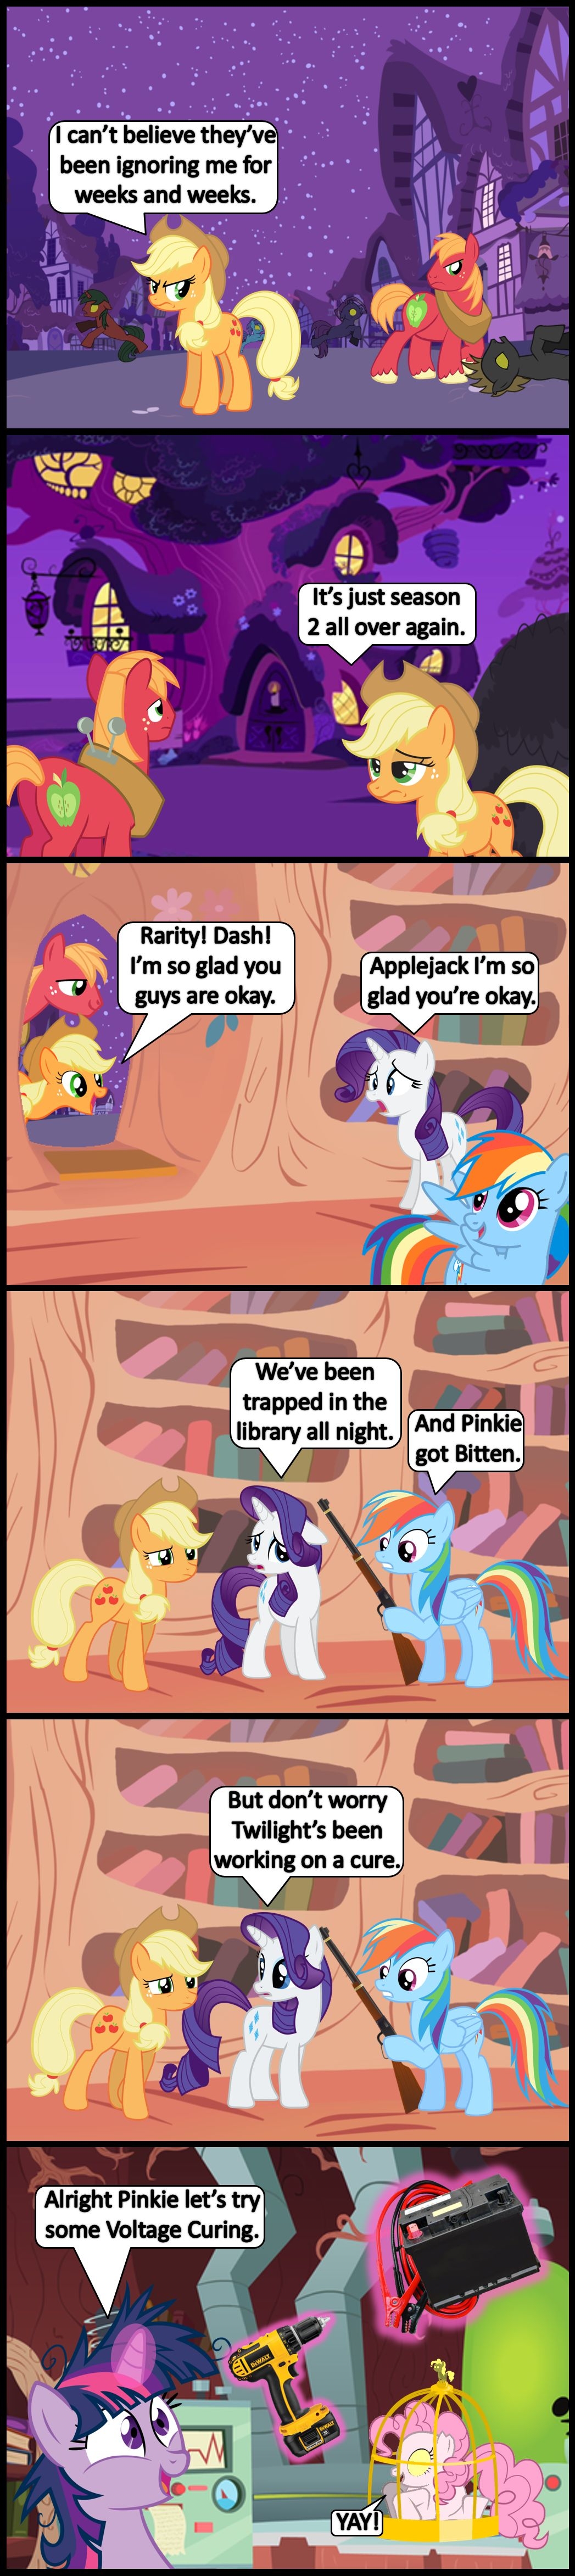 [Bronybyexception] Beating a Dead Pony (My Little Pony: Friendship is Magic) [English] [Ongoing] 21